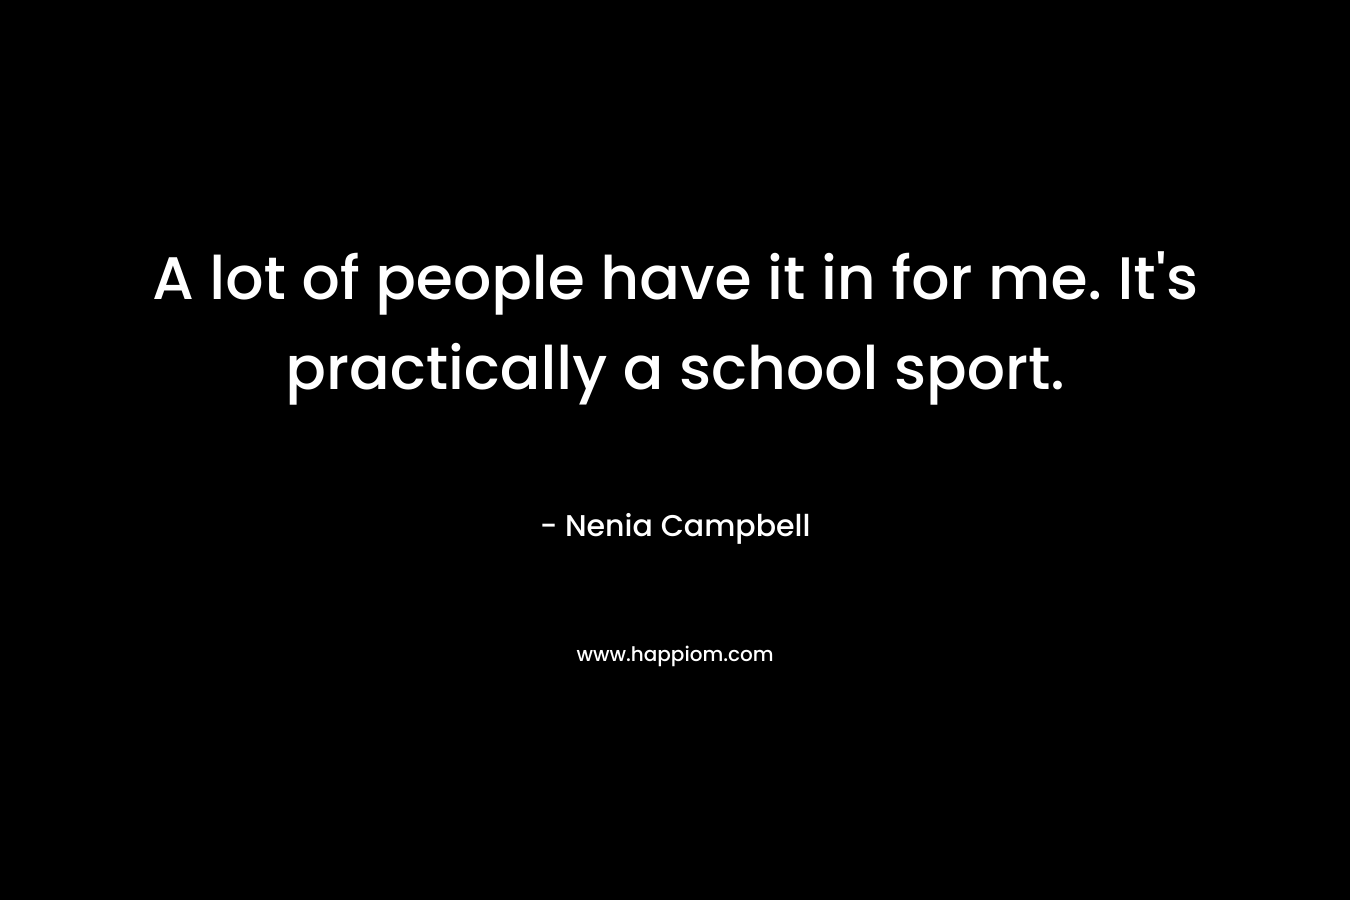 A lot of people have it in for me. It’s practically a school sport. – Nenia Campbell